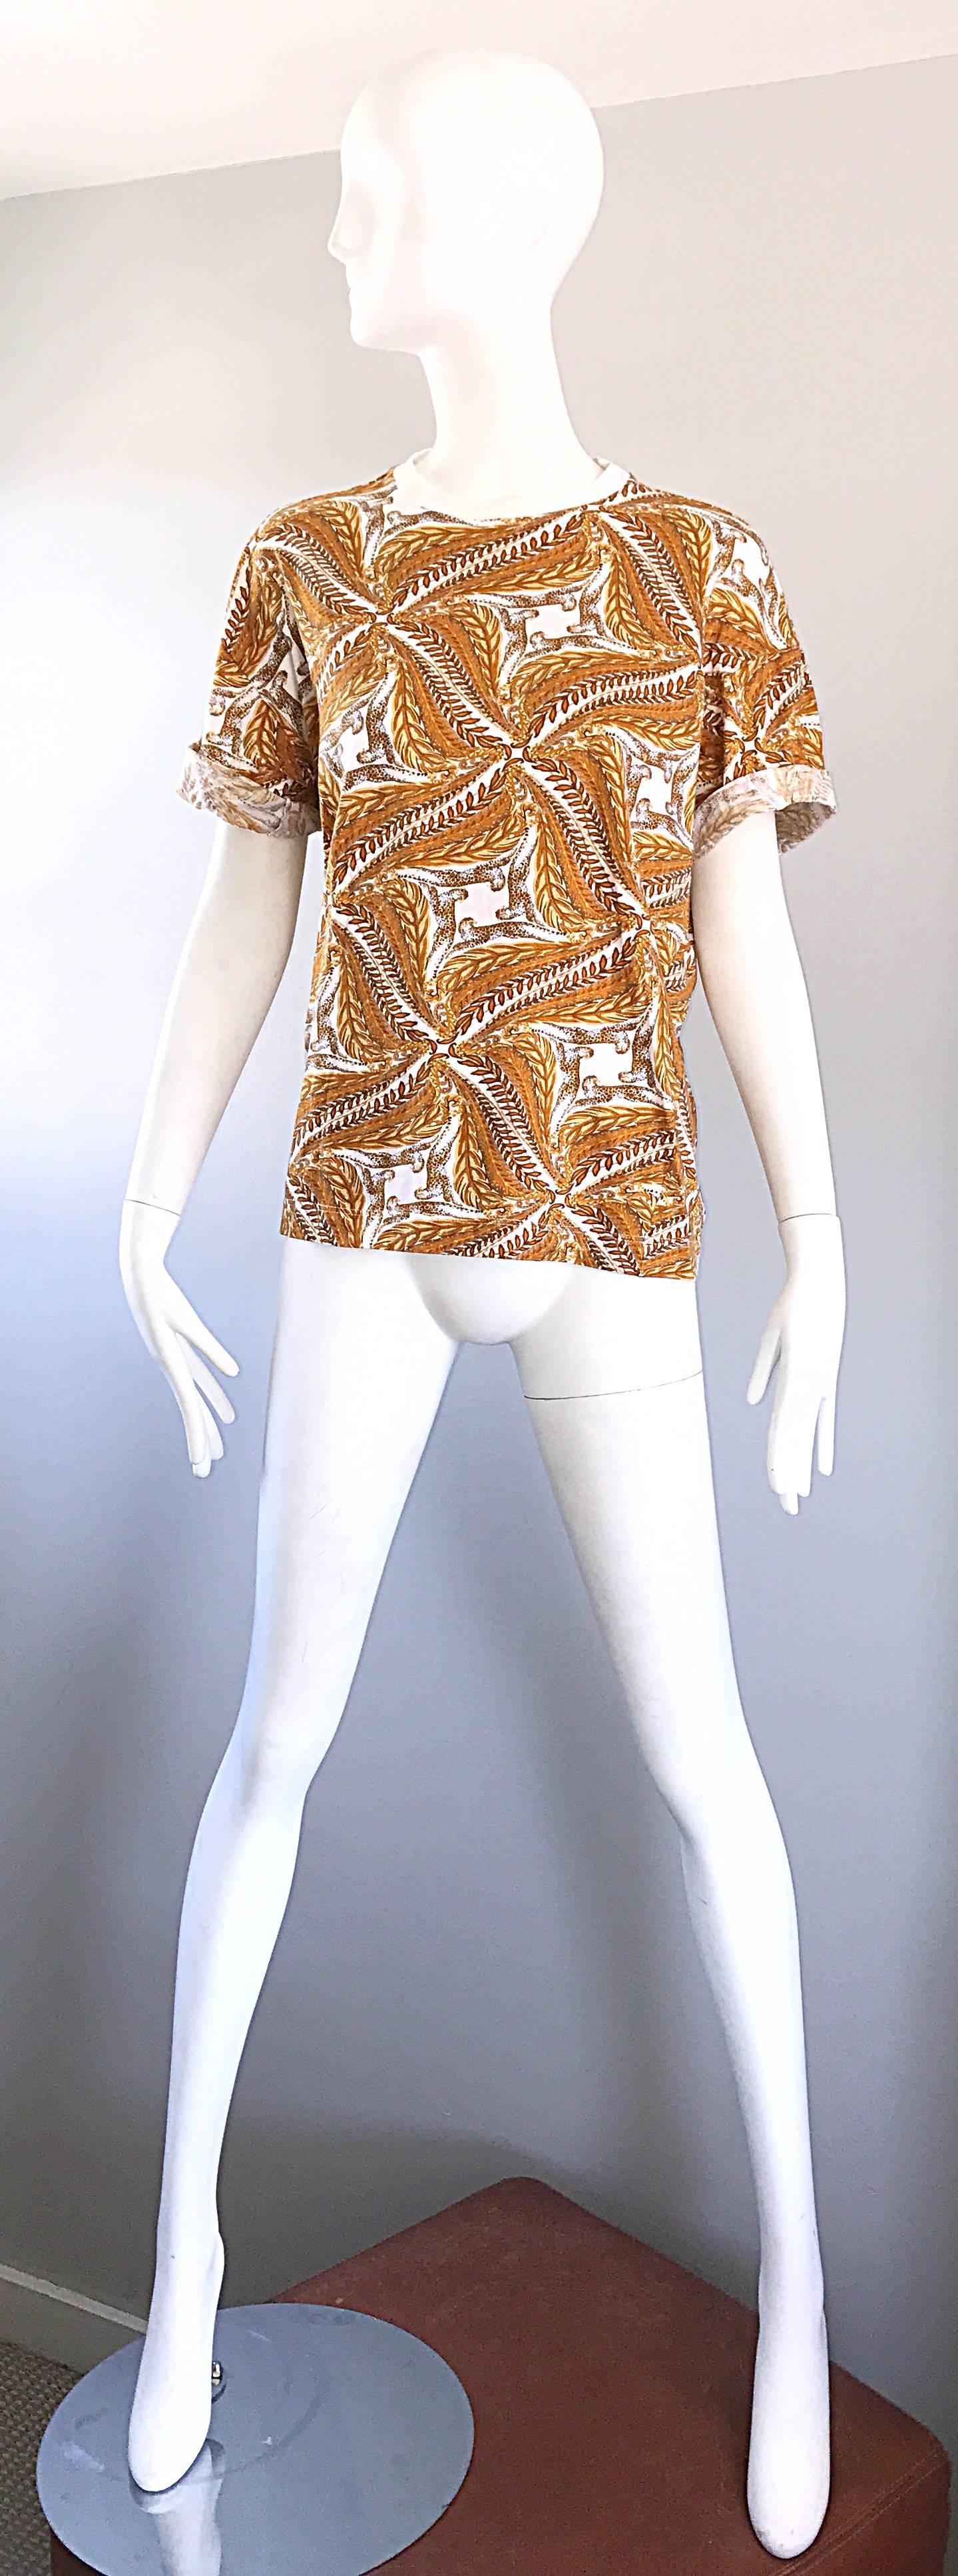 Chic vintage SALVATORE FERRAGOMO cheetah/leopard and wheat print short sleeve cotton t-shirt! Features symmetrical prints in gold, yellow, marigold and white. Sleeves can be worn rolled up for a more trendy look. Great with shorts, jeans, trousers